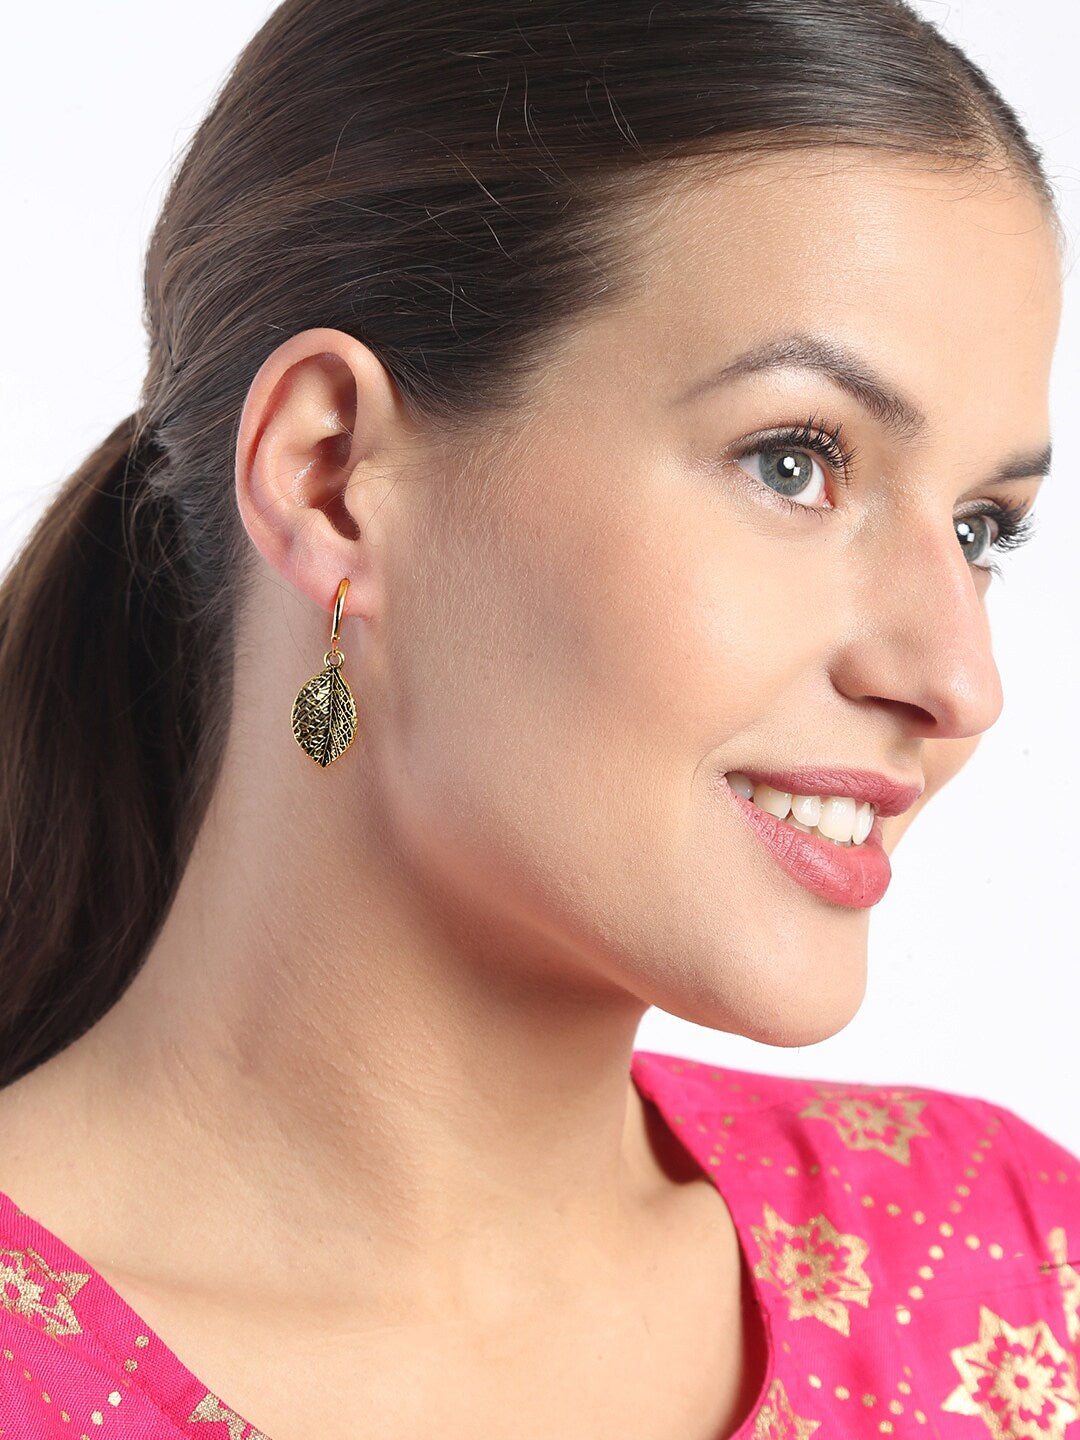 EL REGALO Gold-Plated Leaf Shaped Drop Earrings - for Women and Girls
Style ID: 17227276